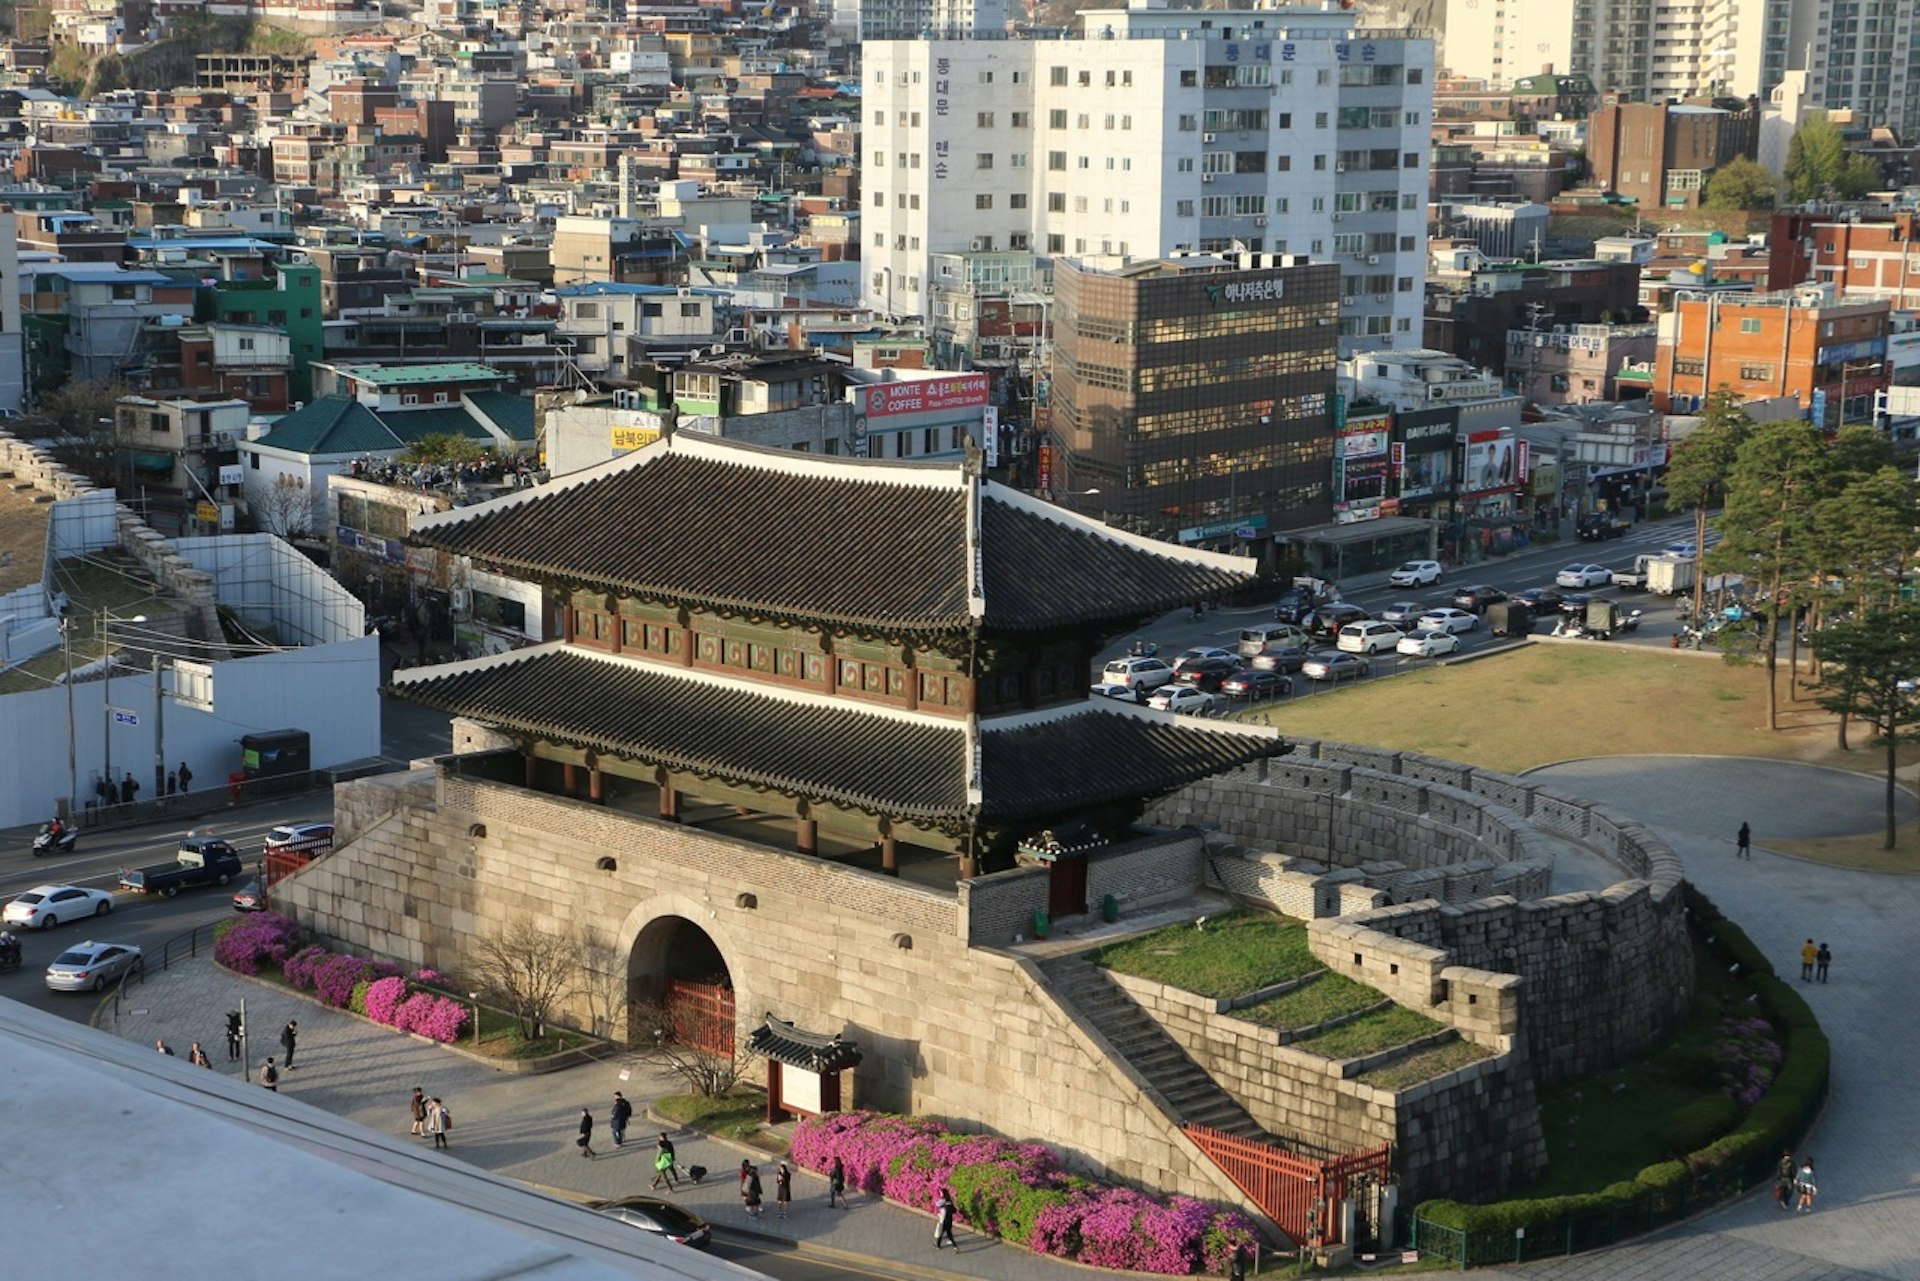 View of a fortress wall in the center of a city